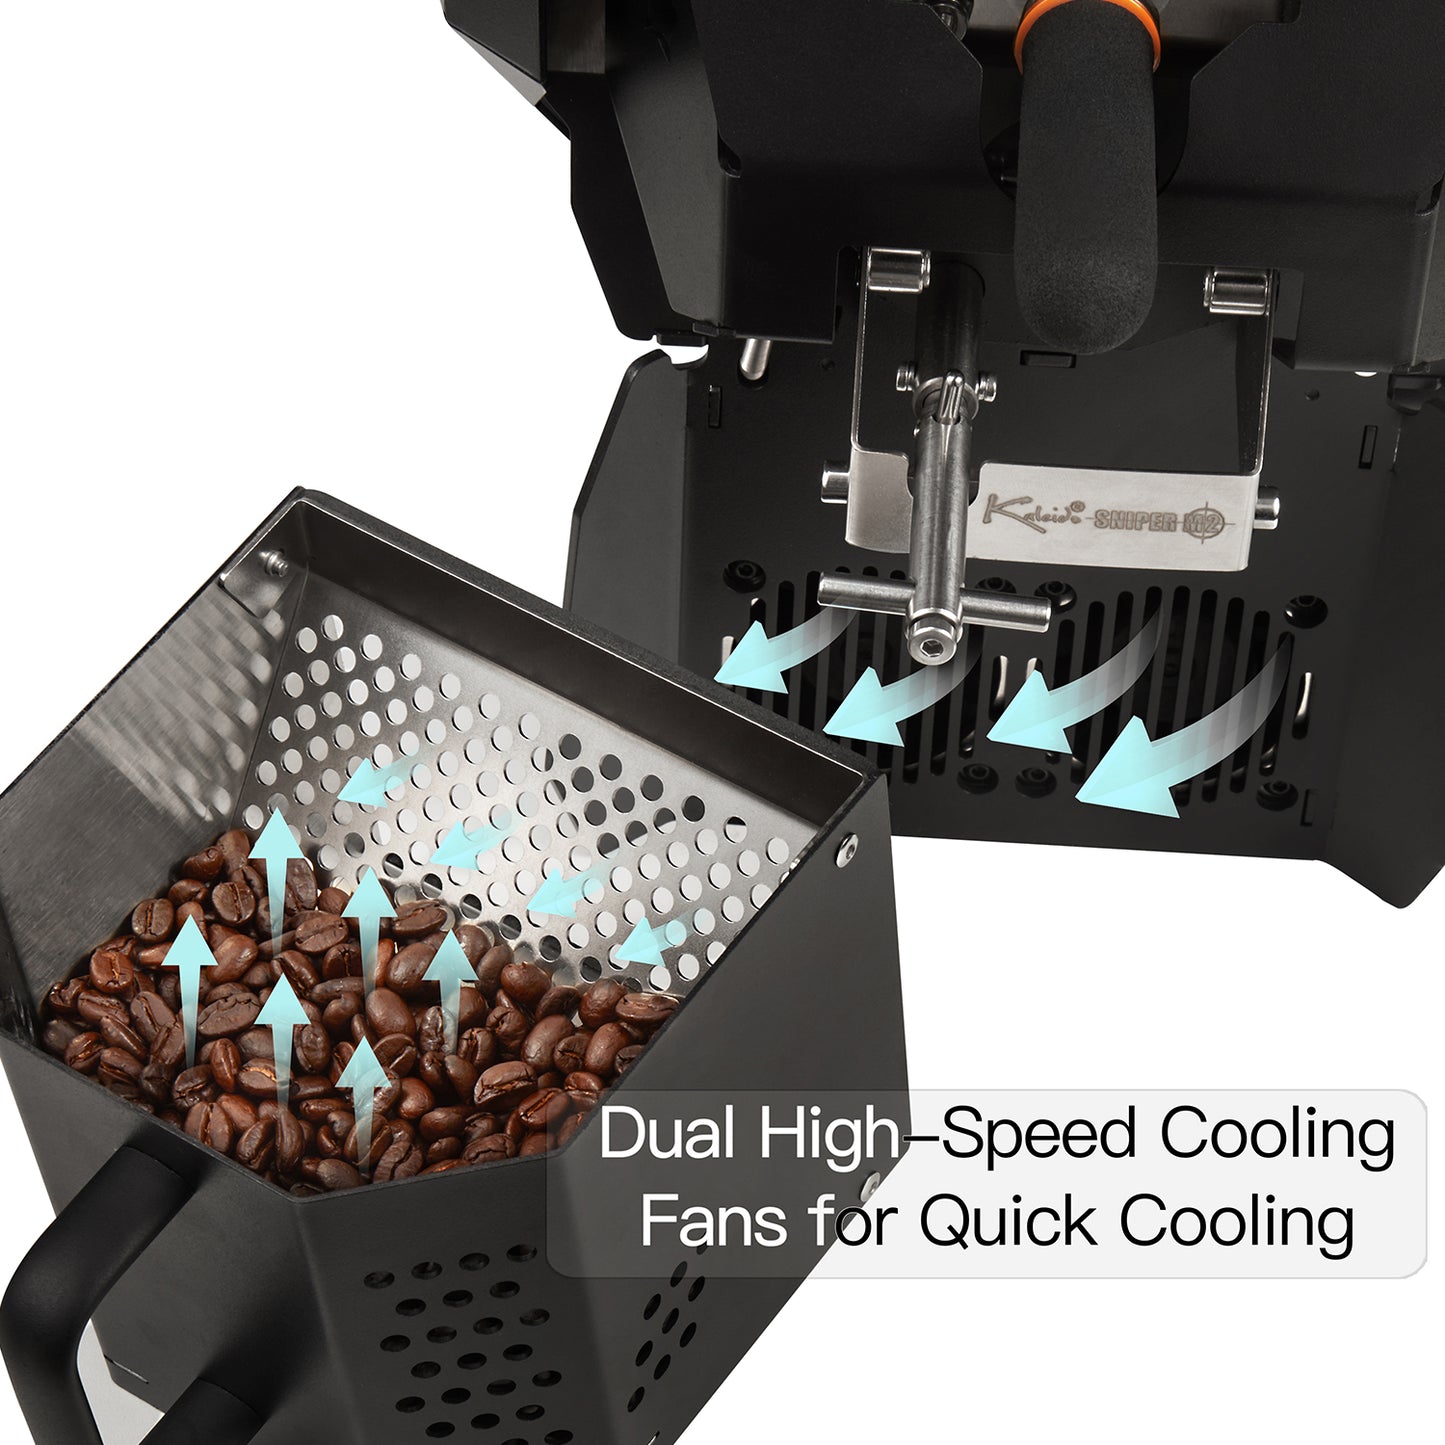 Kaleido Sniper M2S Dual system Electric Heating Professional Coffee Roaster (Kaleido System+ArtisanControl)-Temperature Probe,Direct Fire Heating, and Hot Air Circulation System (50-400g)